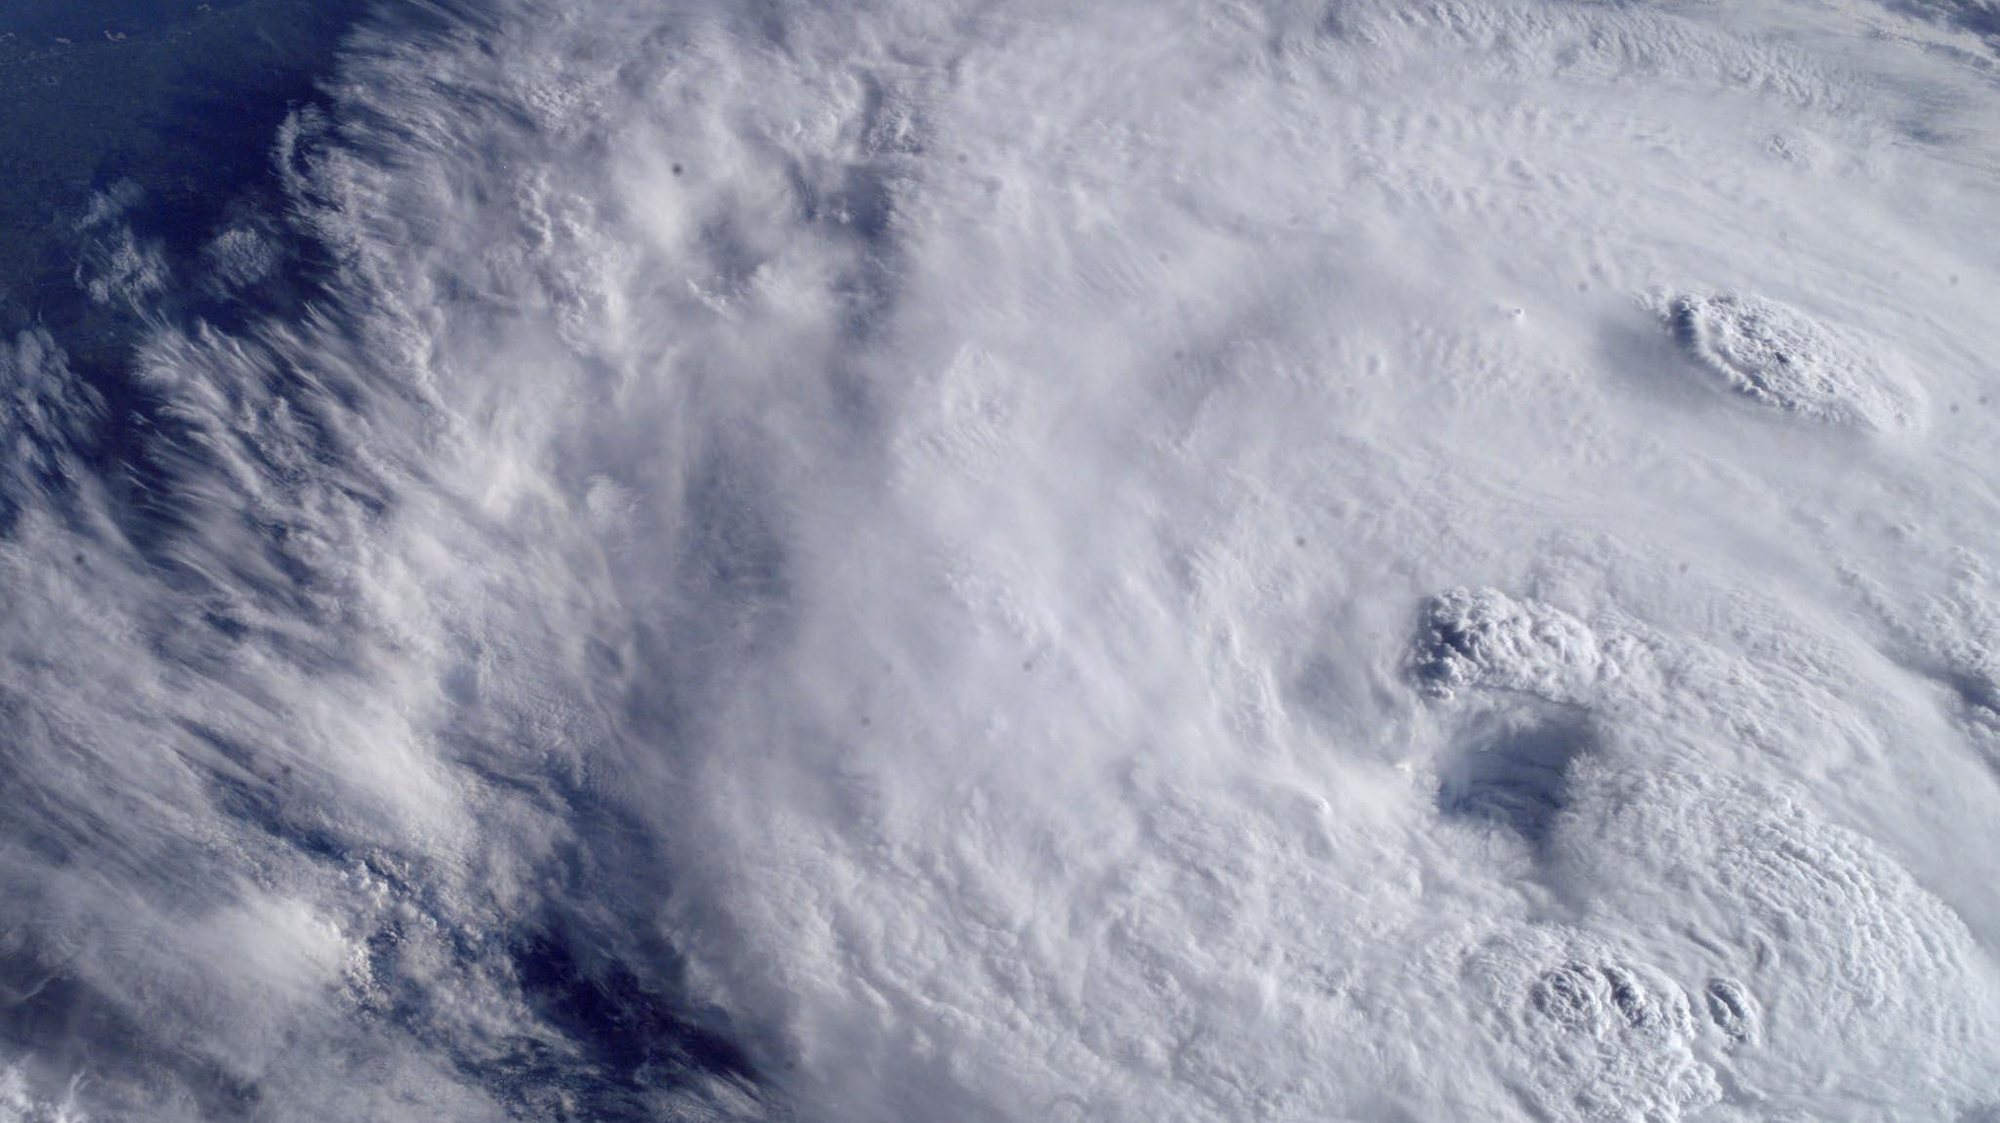 This NASA image released 16 July, 2003 captured 15 July by the crew on board the International Space Station,  shows Hurricane Claudette. Claudette has been blamed for at least two deaths and caused considerable damage along the Texas gulf coast before being downgraded to a tropical depression. The eye of the storm can be seen left of center. AFP PHOTO/NASA